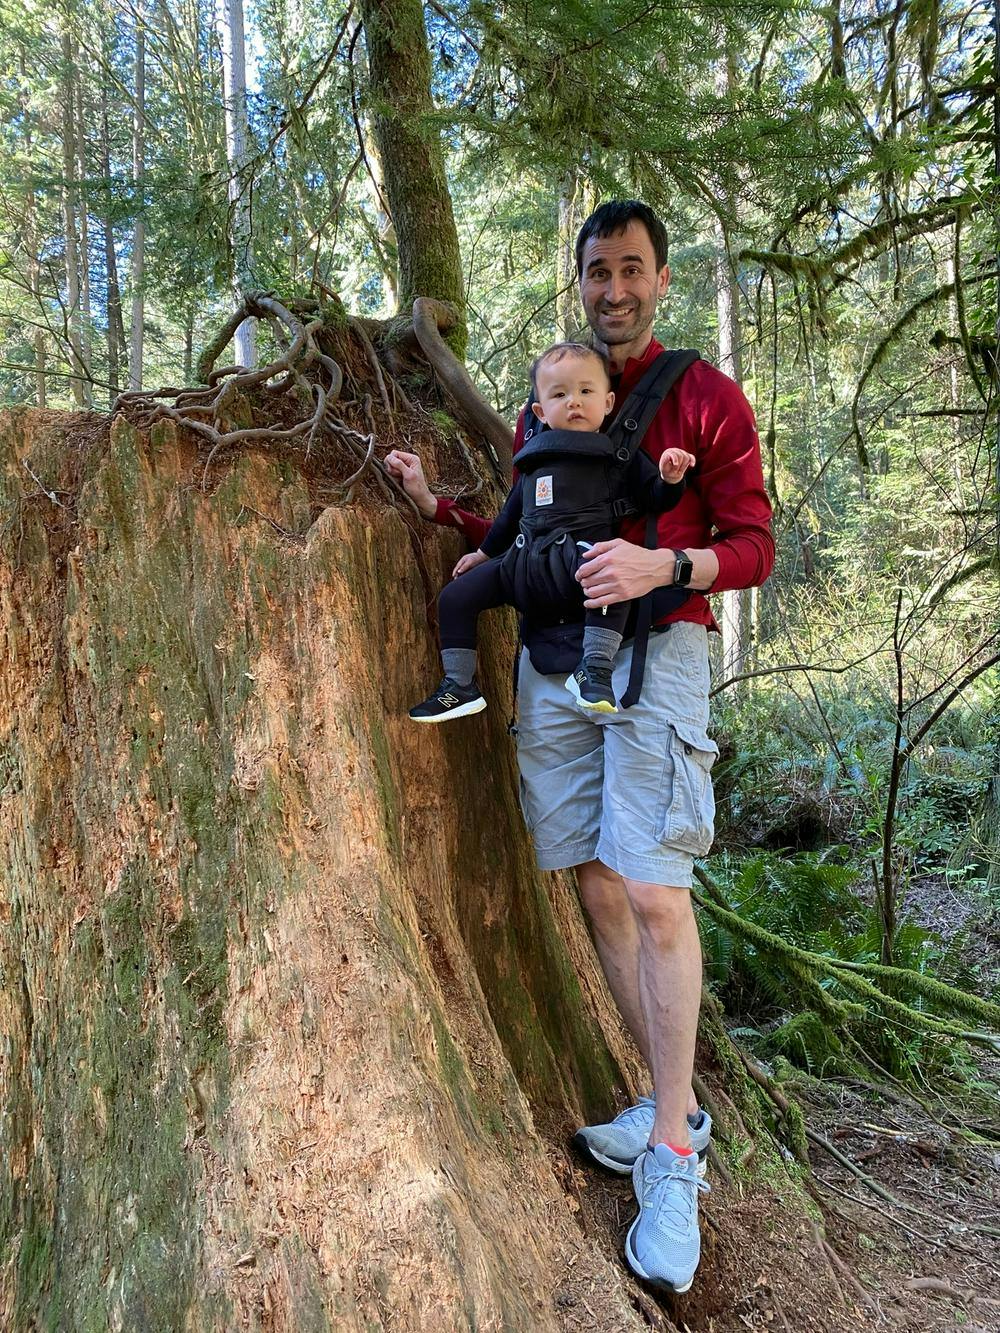 Rob and his child hiking in the woods standing next to a tree stump